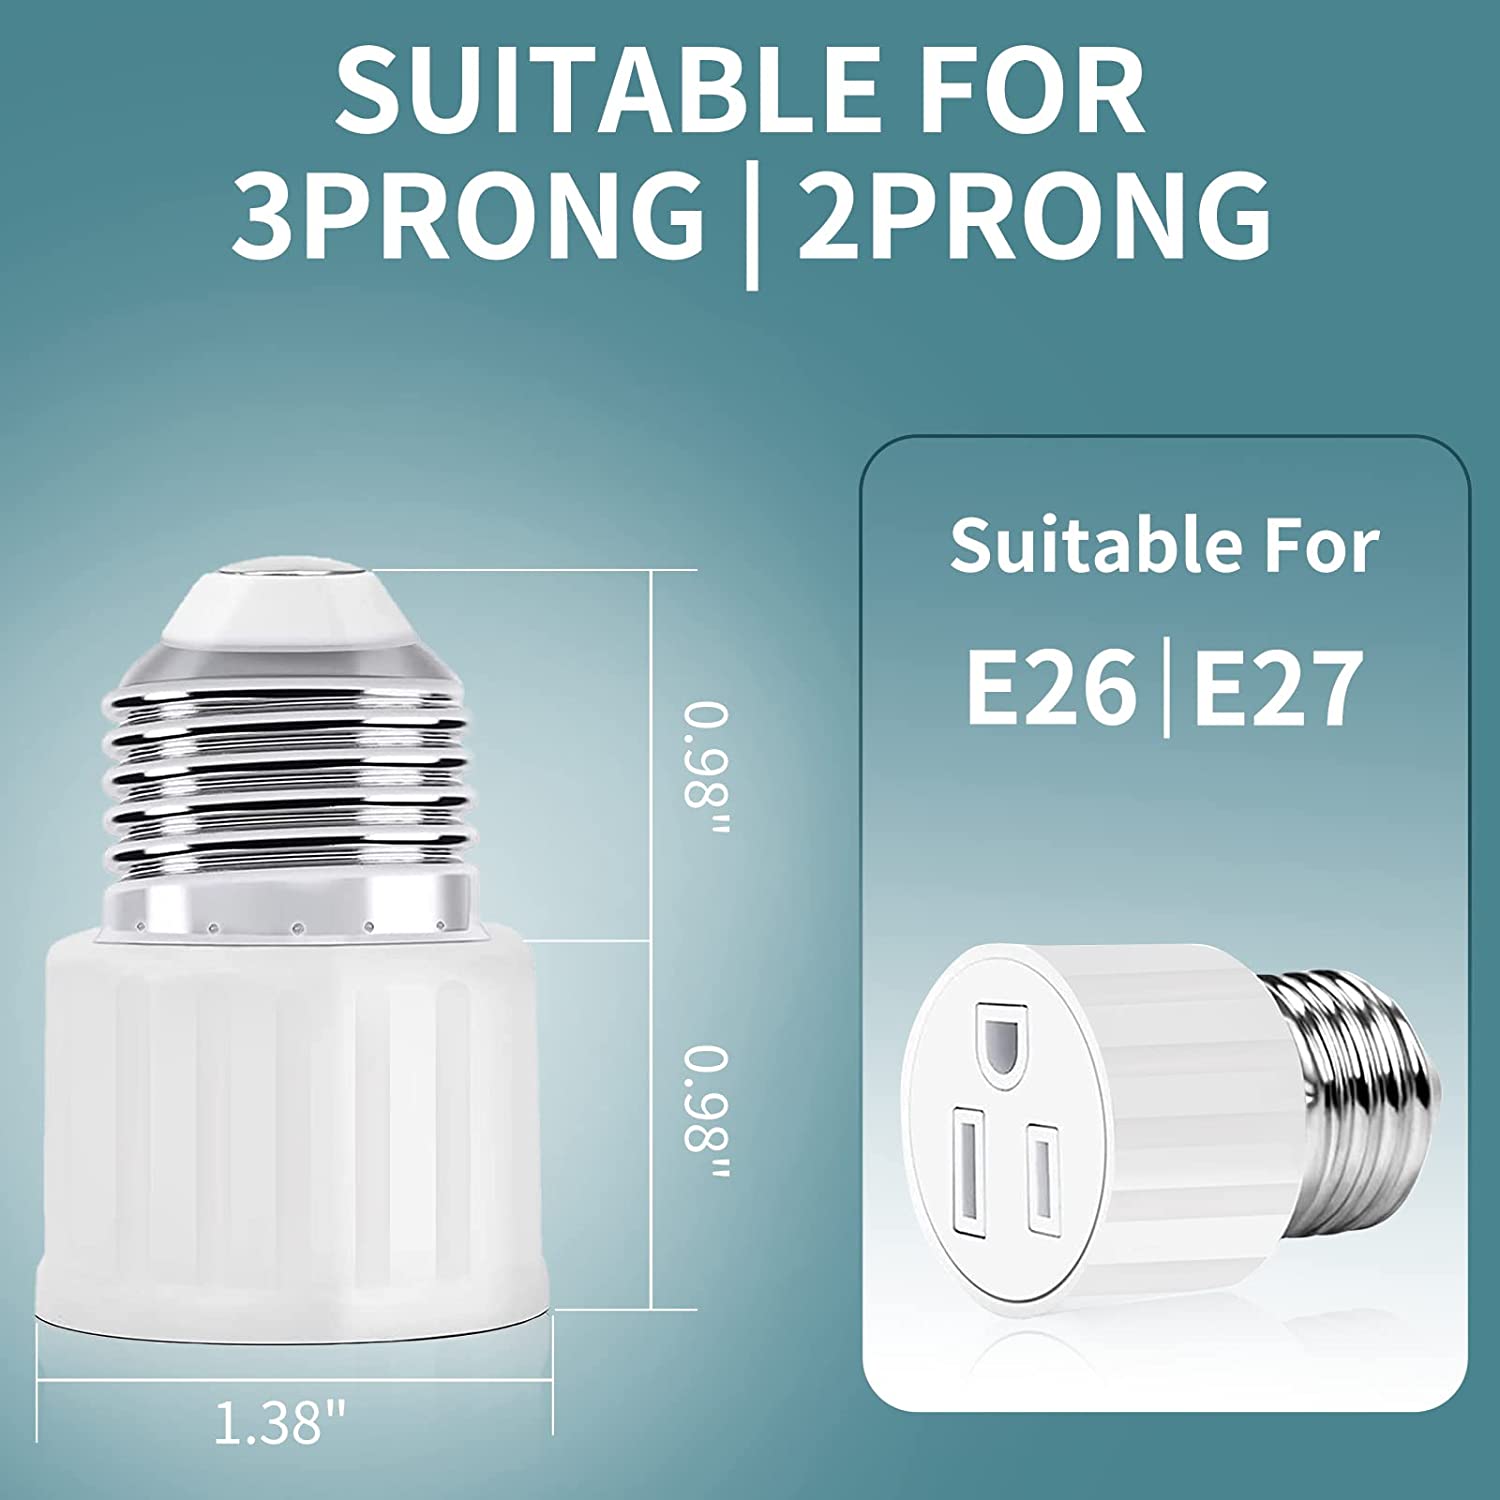 2-Pack Prong Light Bulb Socket Adapters, Polarized Outlet, UL Listed  E26/E27 Converter for Patio, Garage, Porch Lighting Prong Light Bulb  Socket